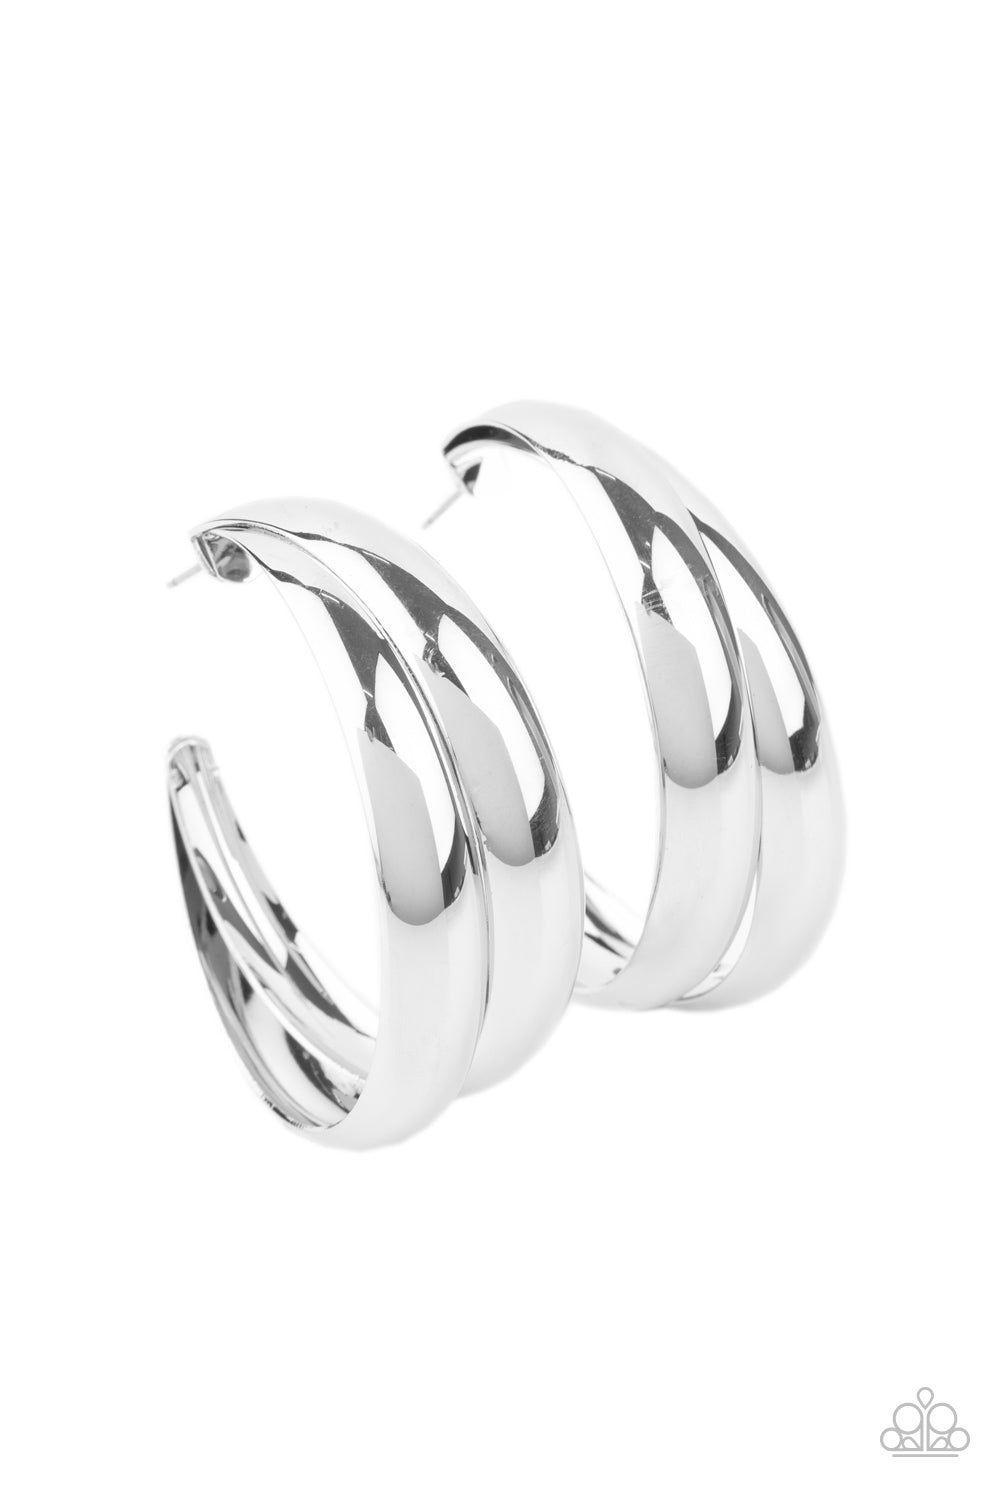 Colossal Curves Earrings - Silver